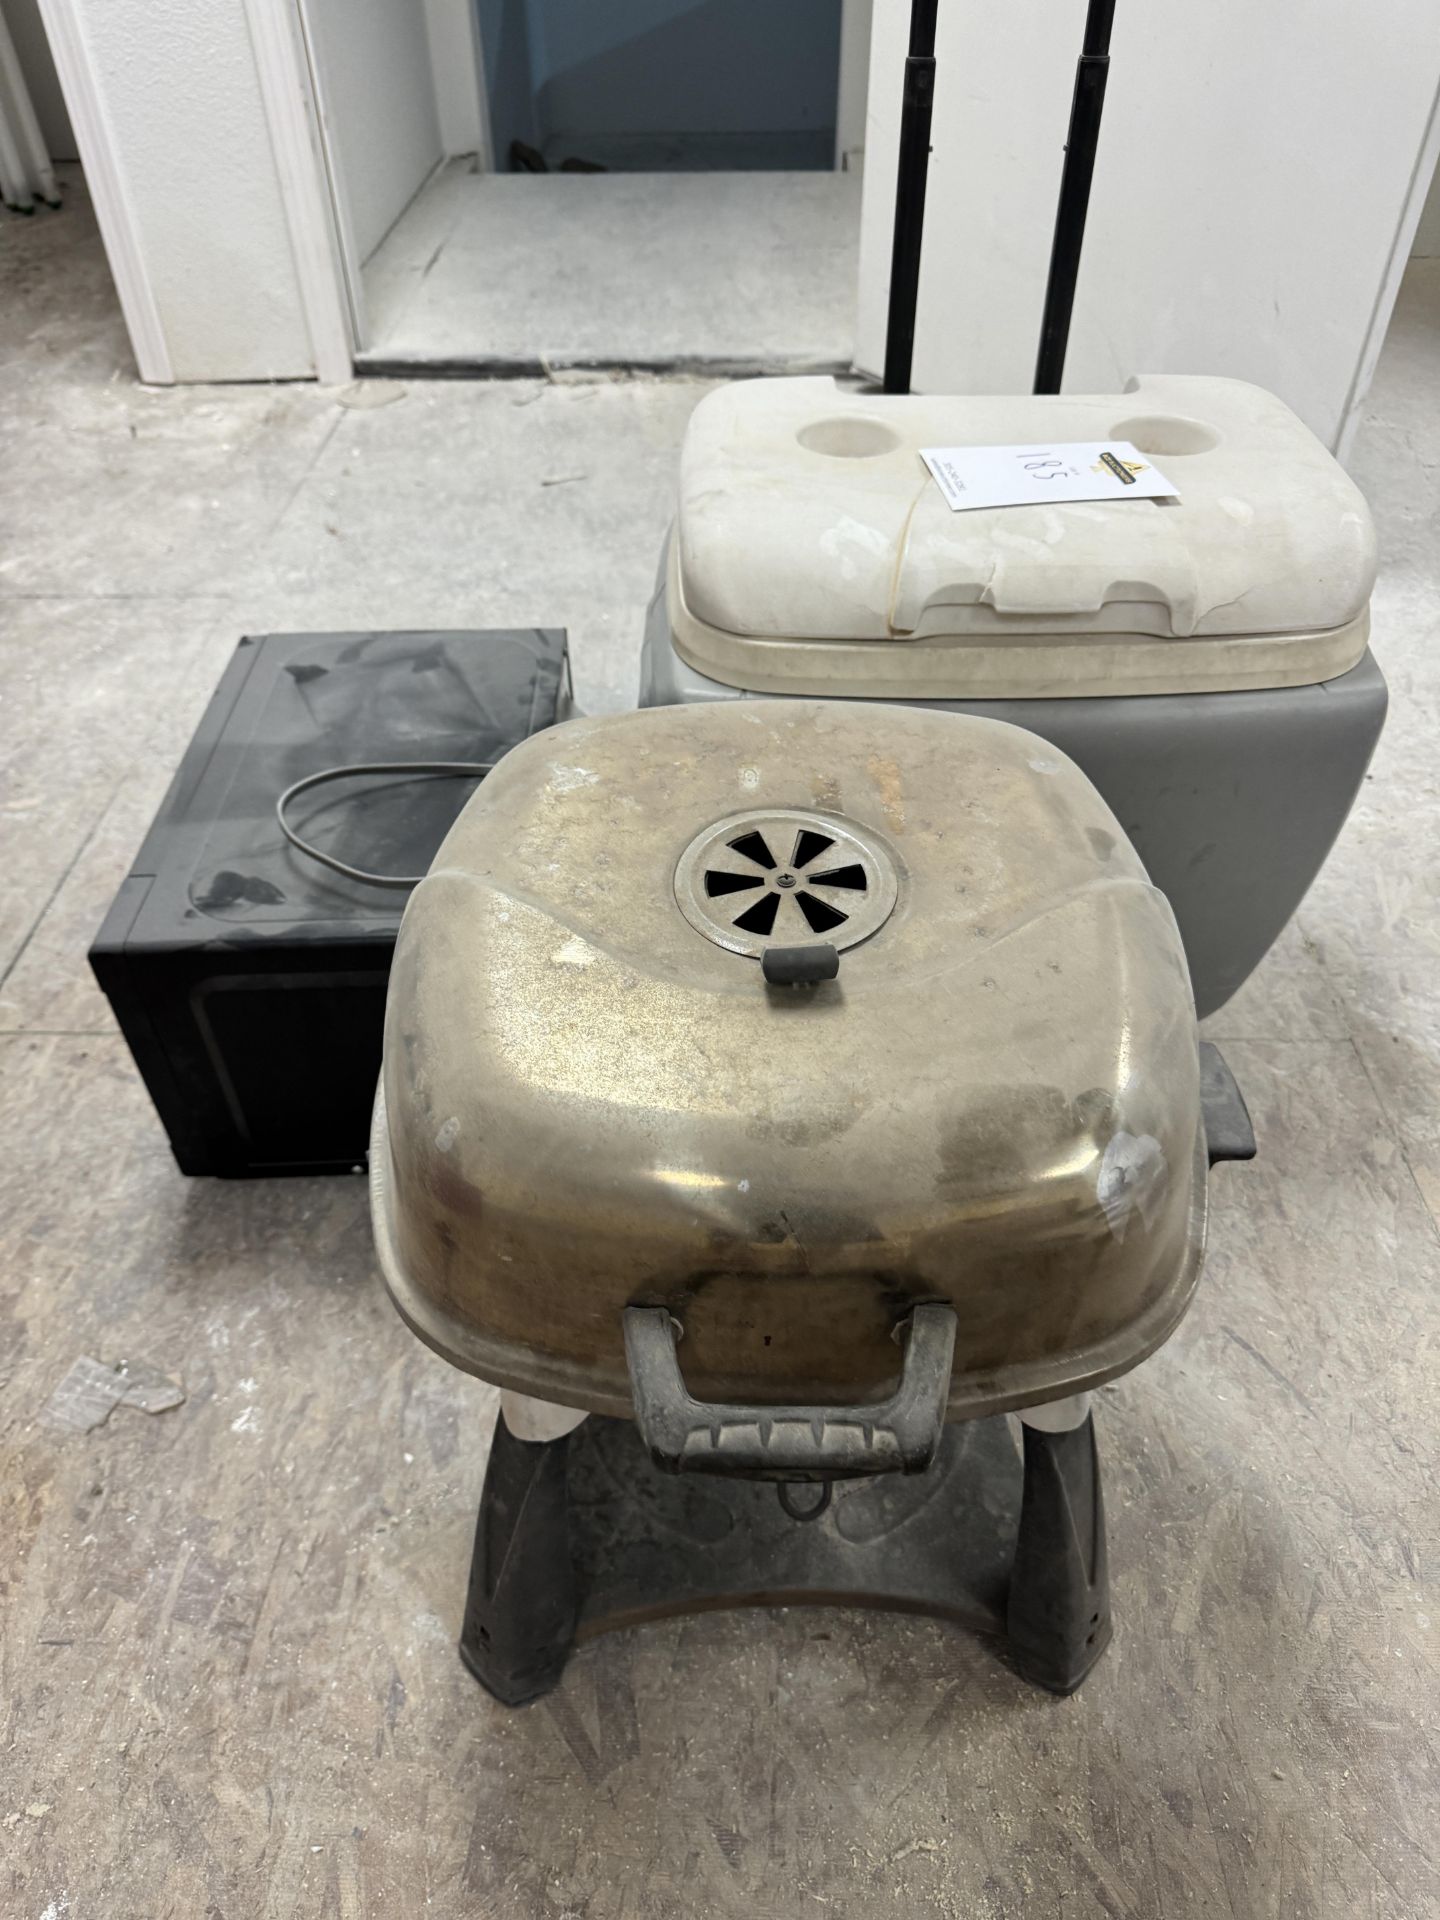 GRILL , MICROWAVE, COOLER ON WHEELS - Image 2 of 3